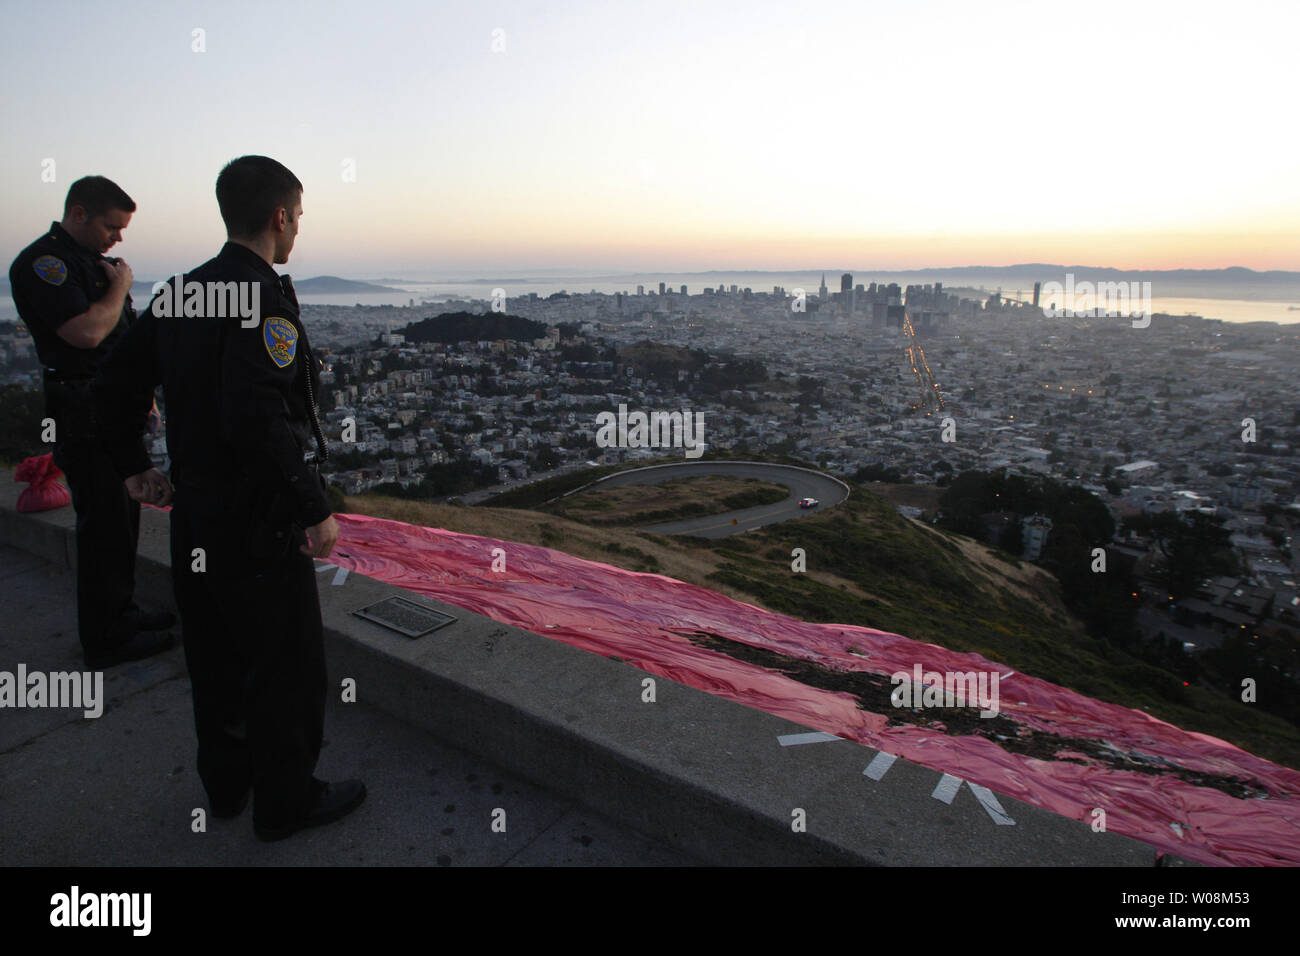 Police officers check out arson vandalism on the huge pink triangle placed on Twin Peaks in San Francisco on June 28, 2009.  The symbol is placed on the city's highest peak for Gay Pride week.   (UPI Photo/Terry Schmitt) Stock Photo